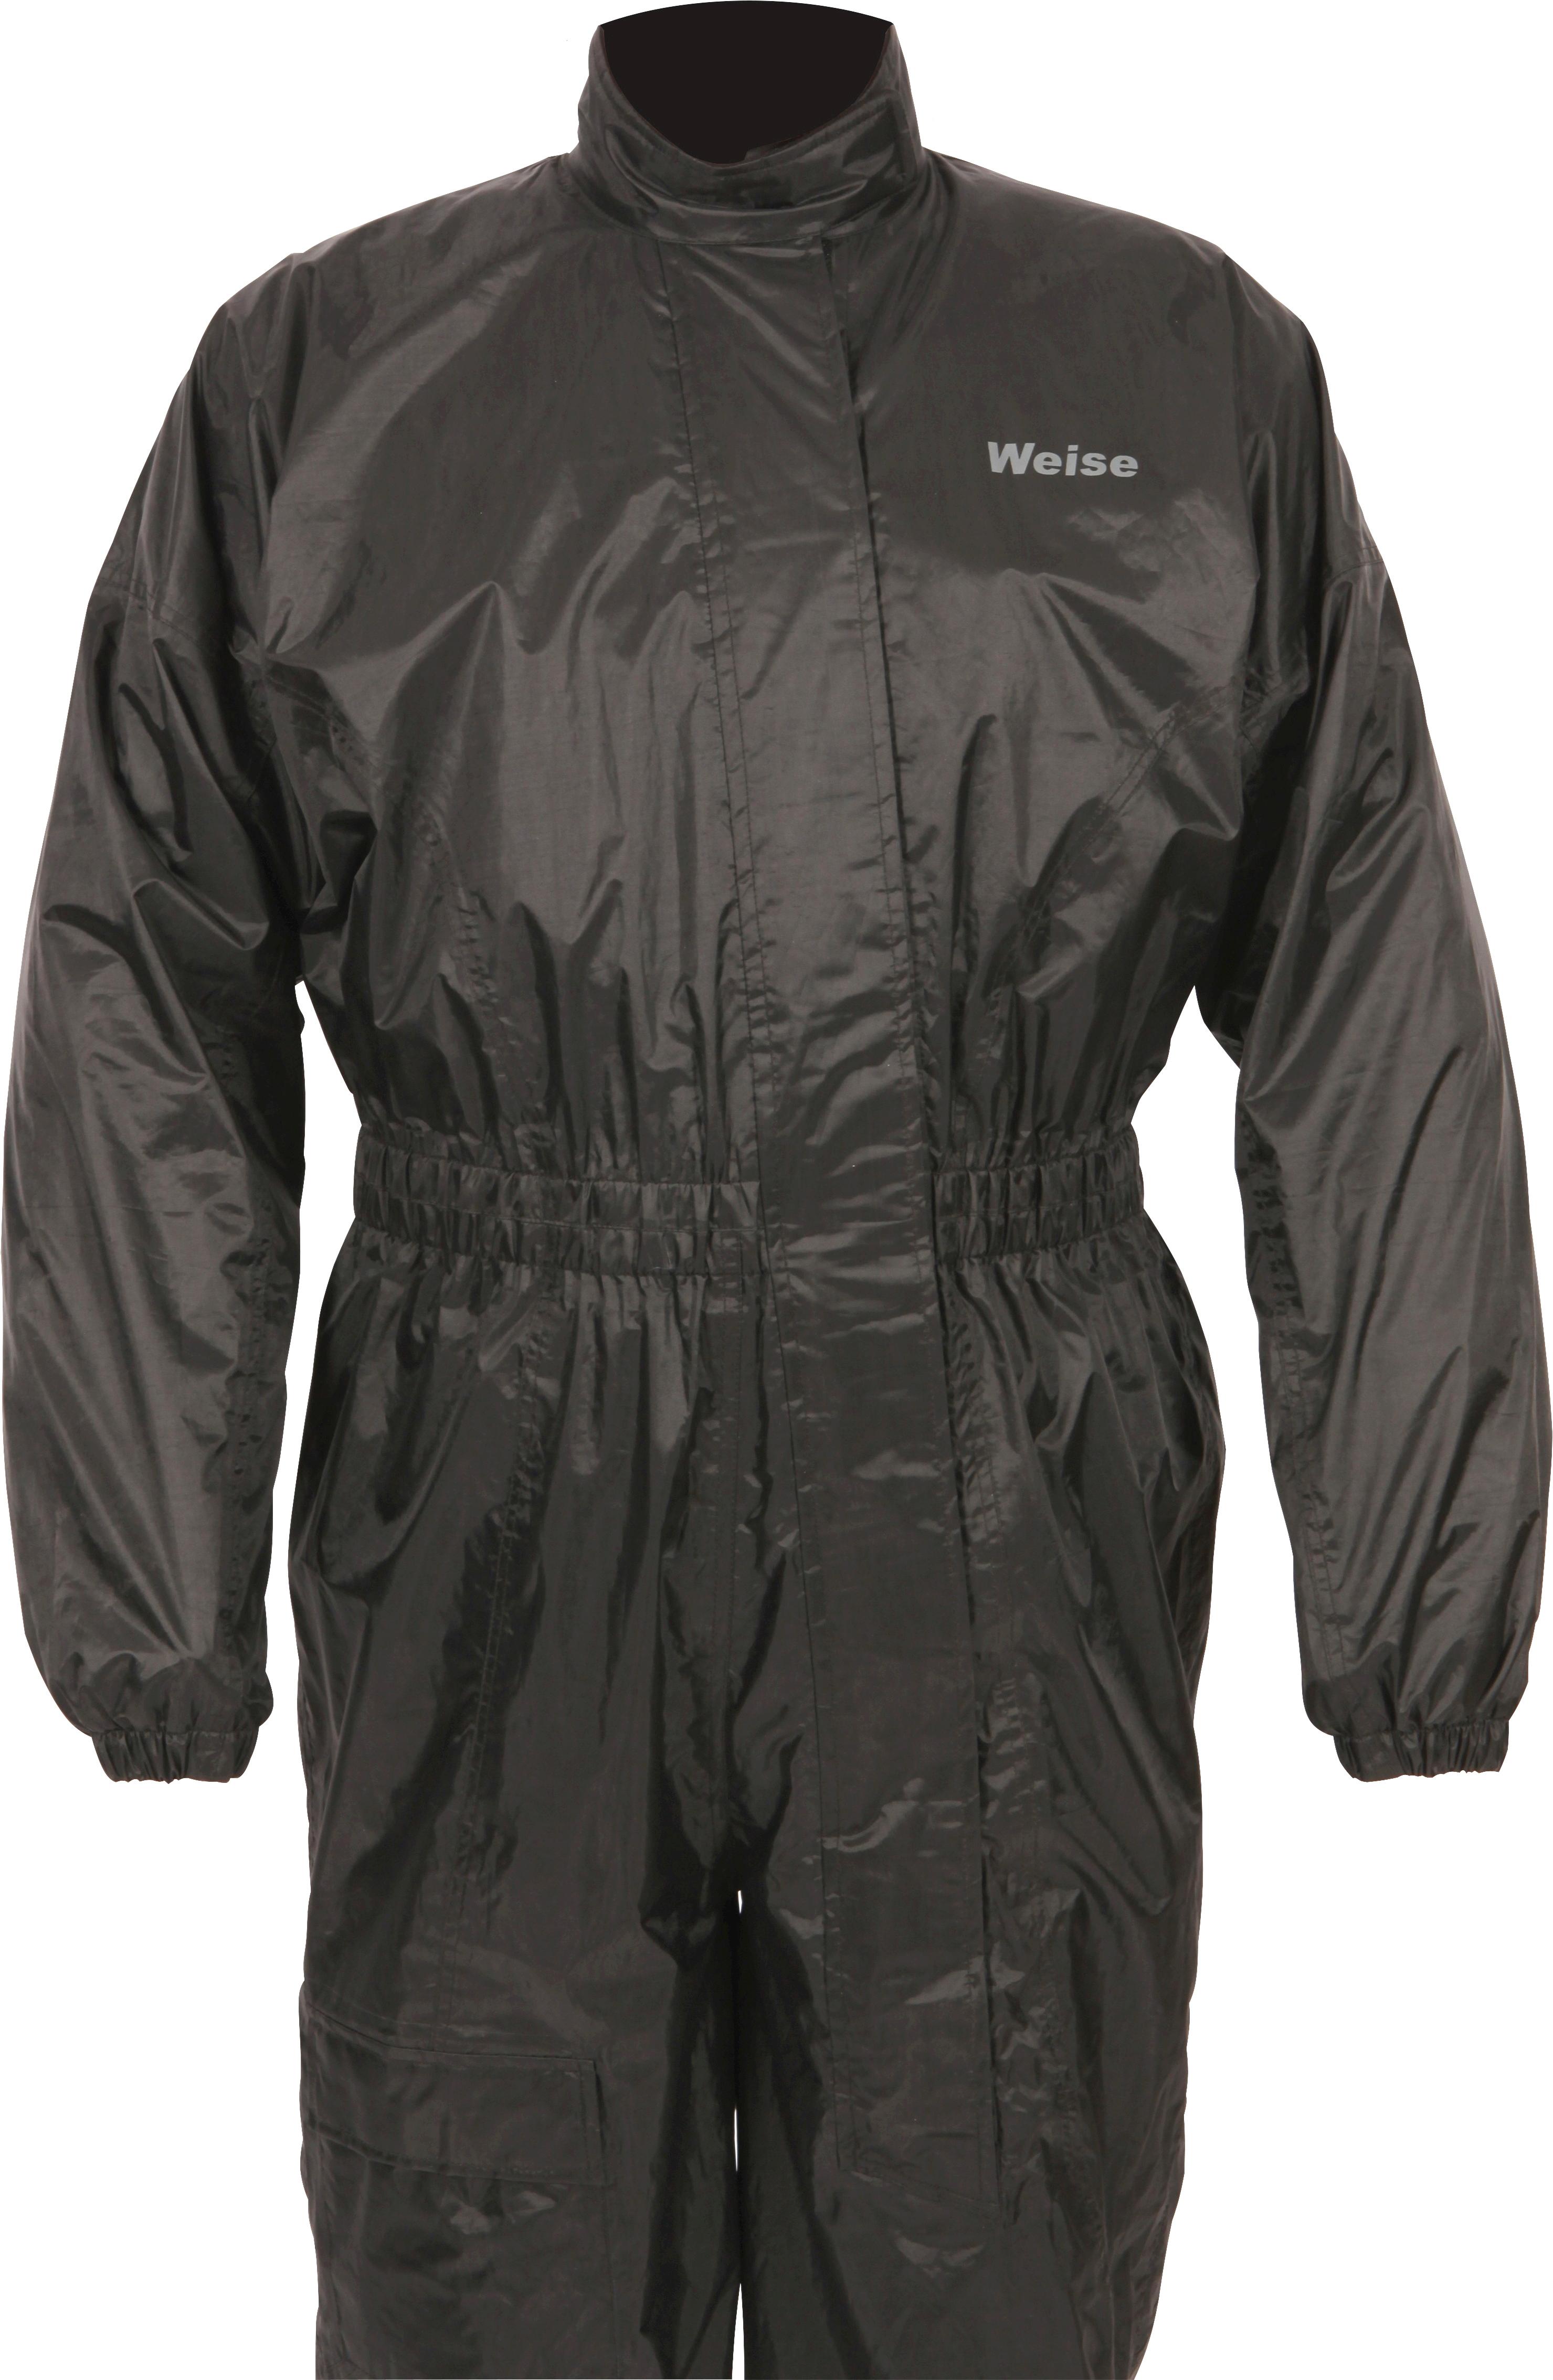 Weise Tempest Oversuit 4Xl